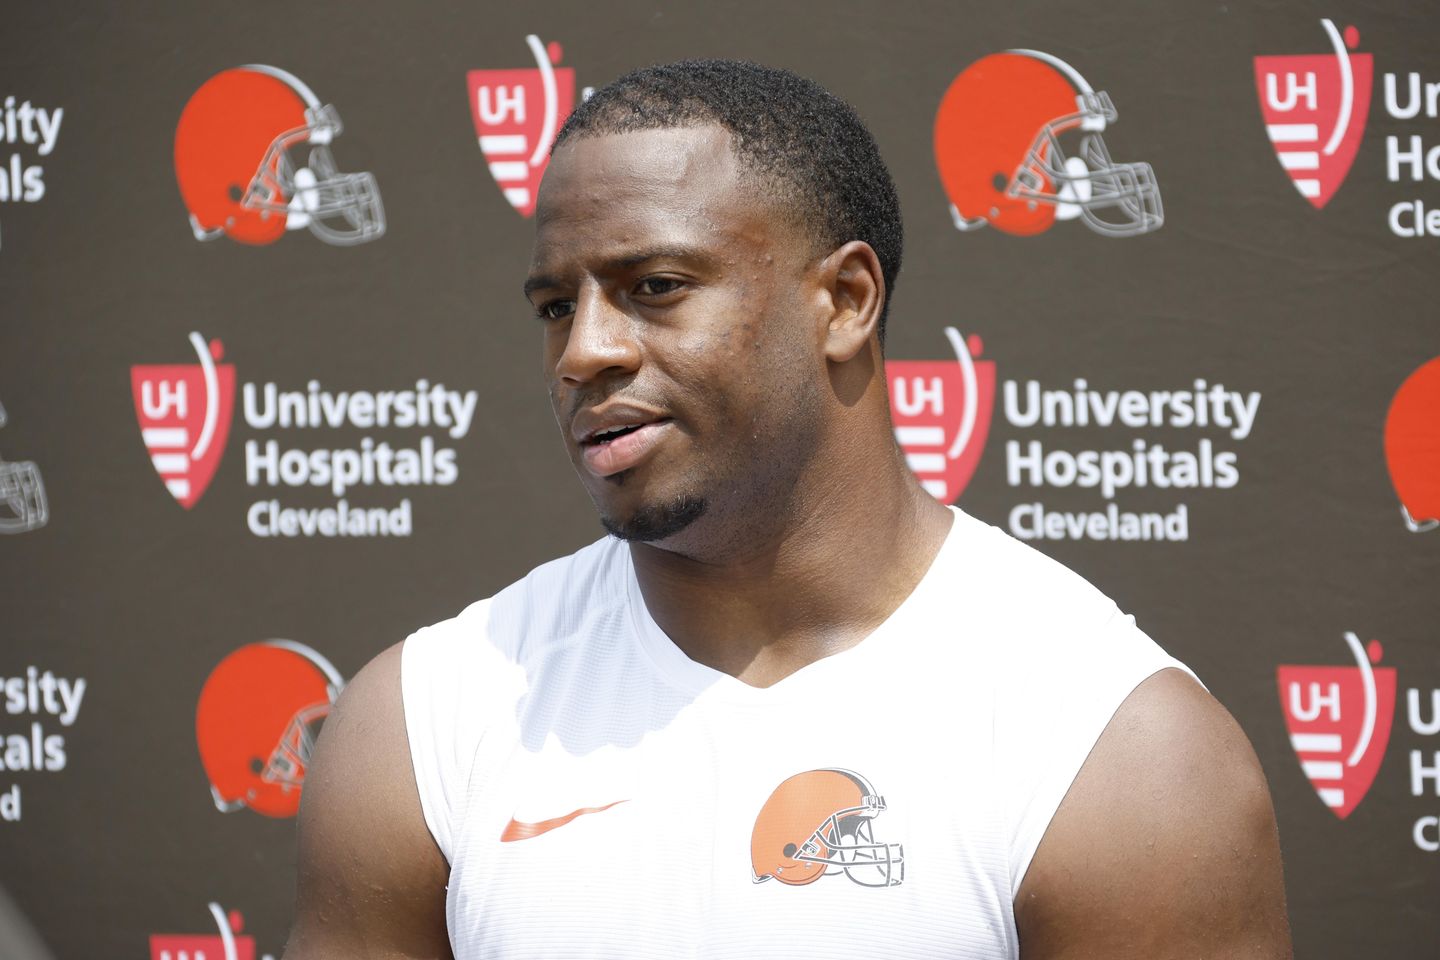 Browns restructure RB Nick Chubb's contract as he rehabs from season-ending injury
